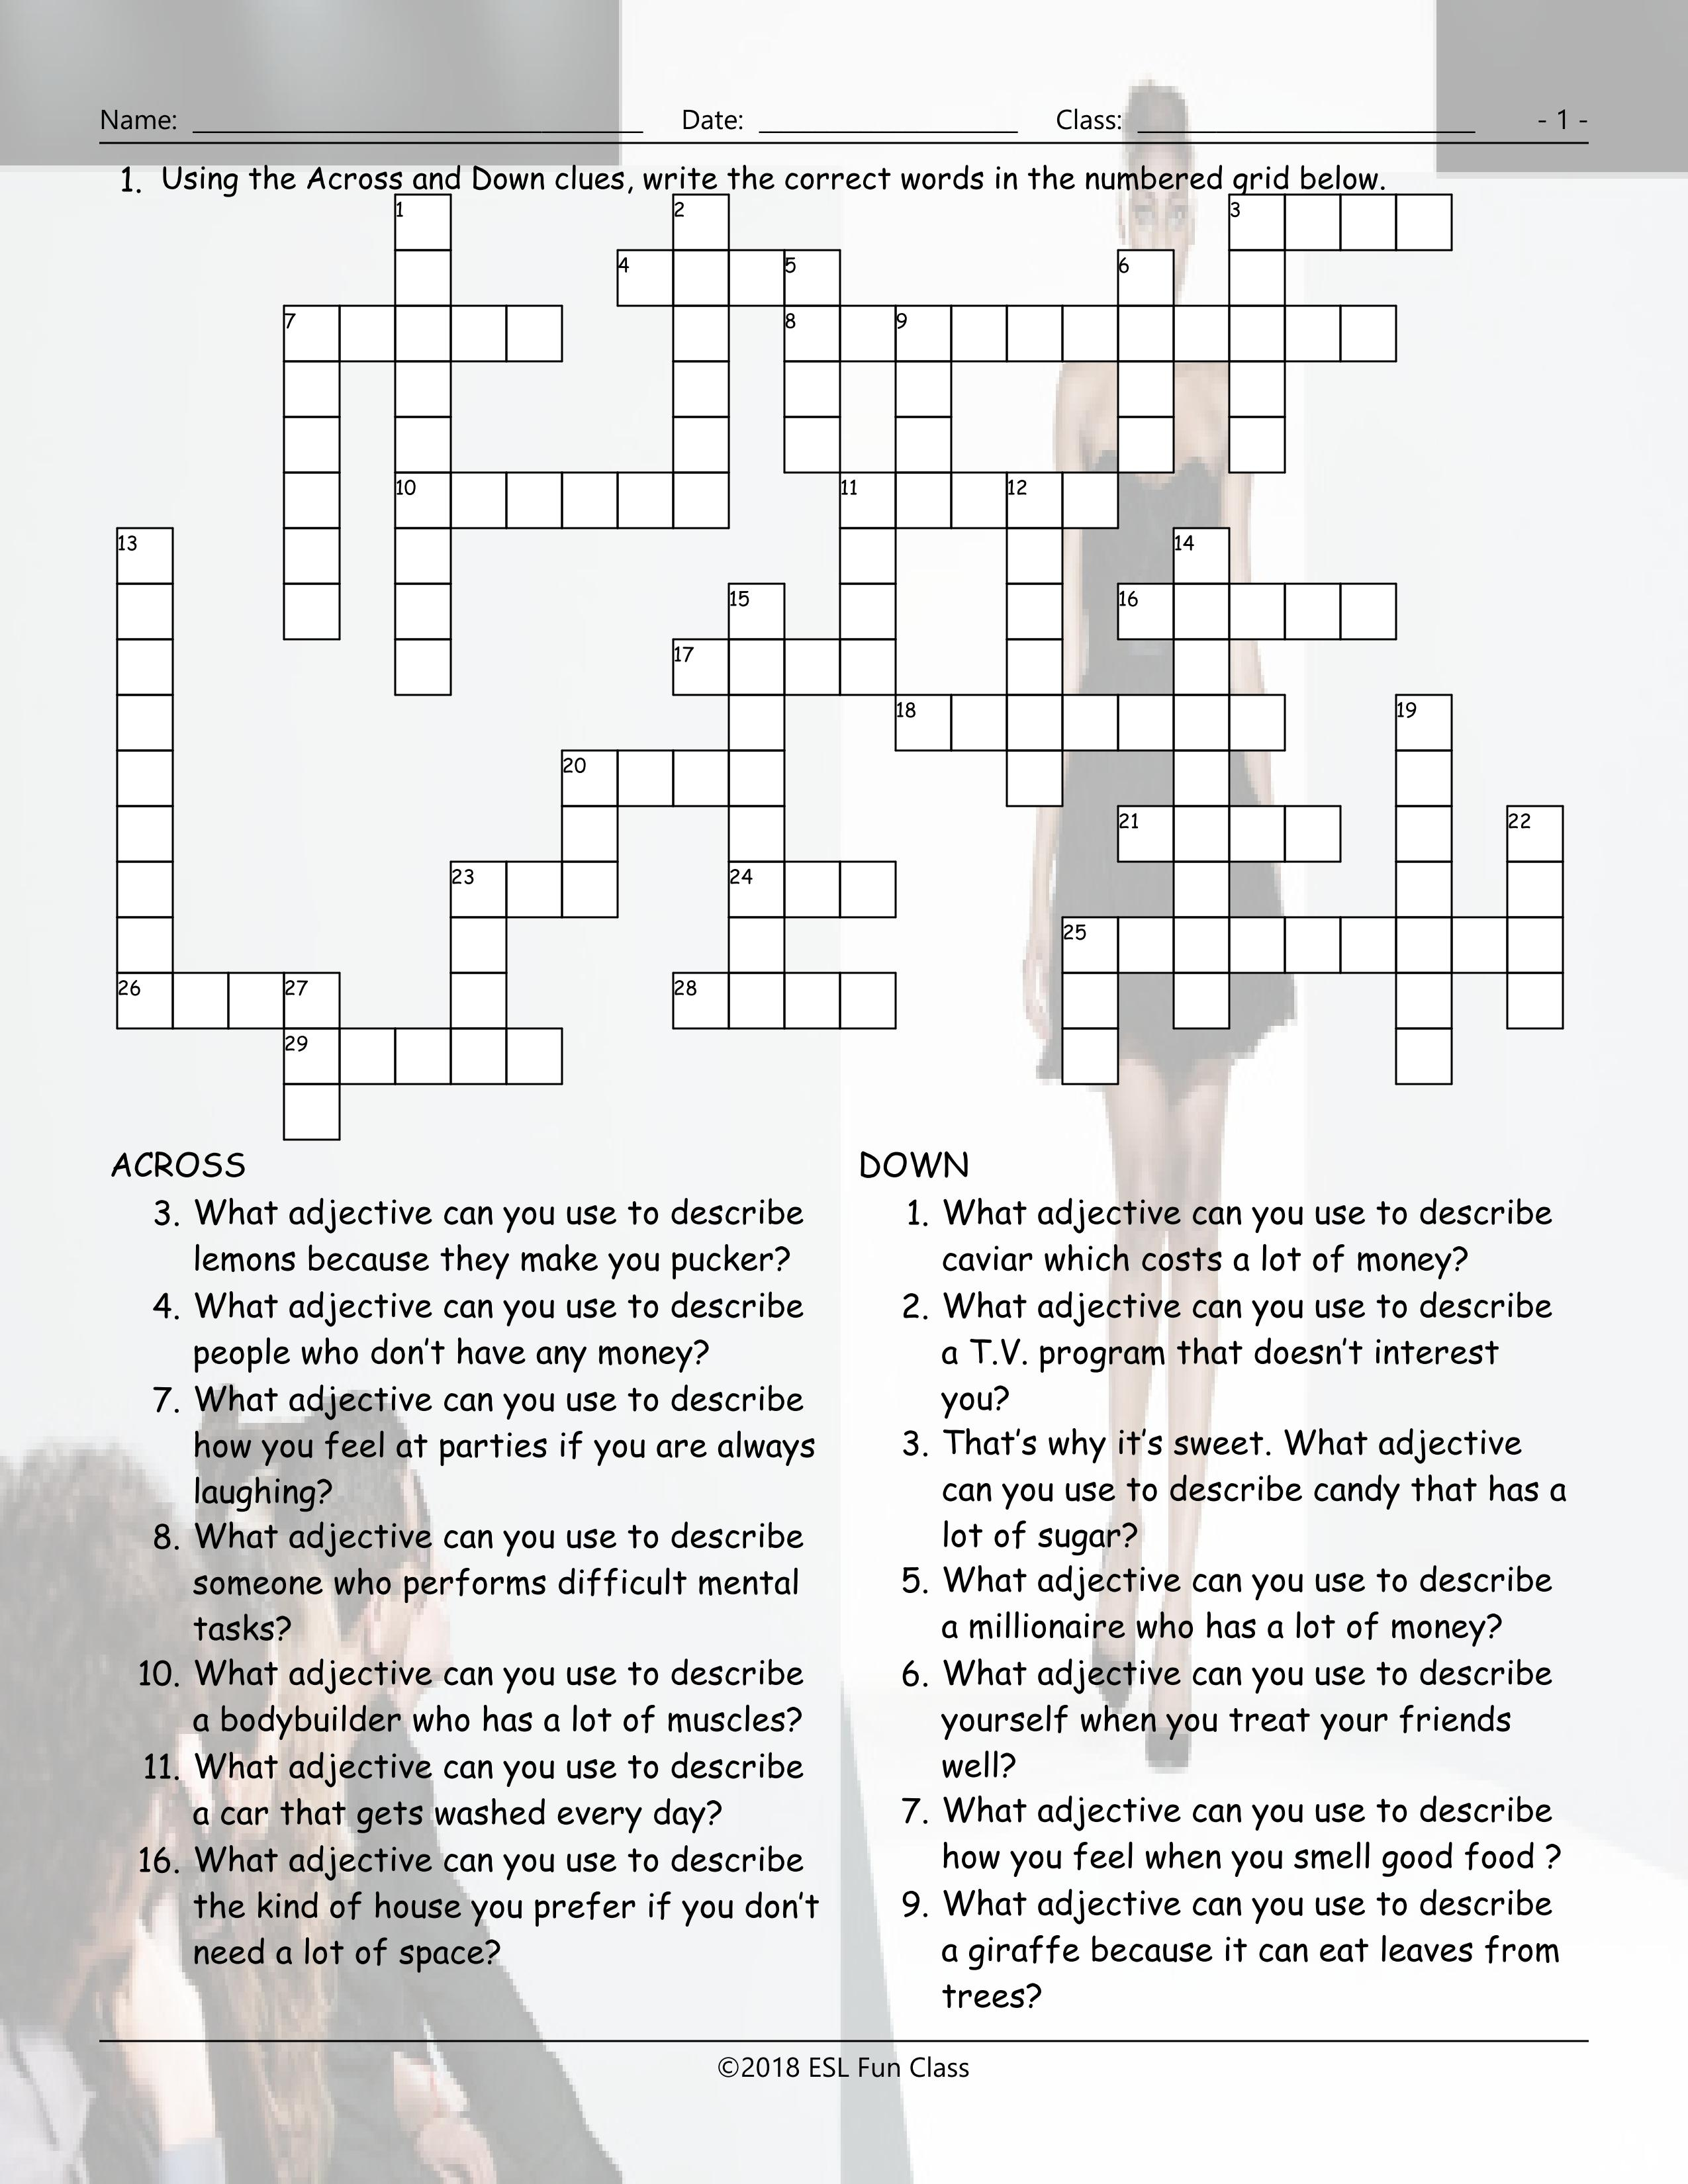 Personality Adjectives Worksheet Free Esl Printable Worksheets Adjectives Crossword Puzzle